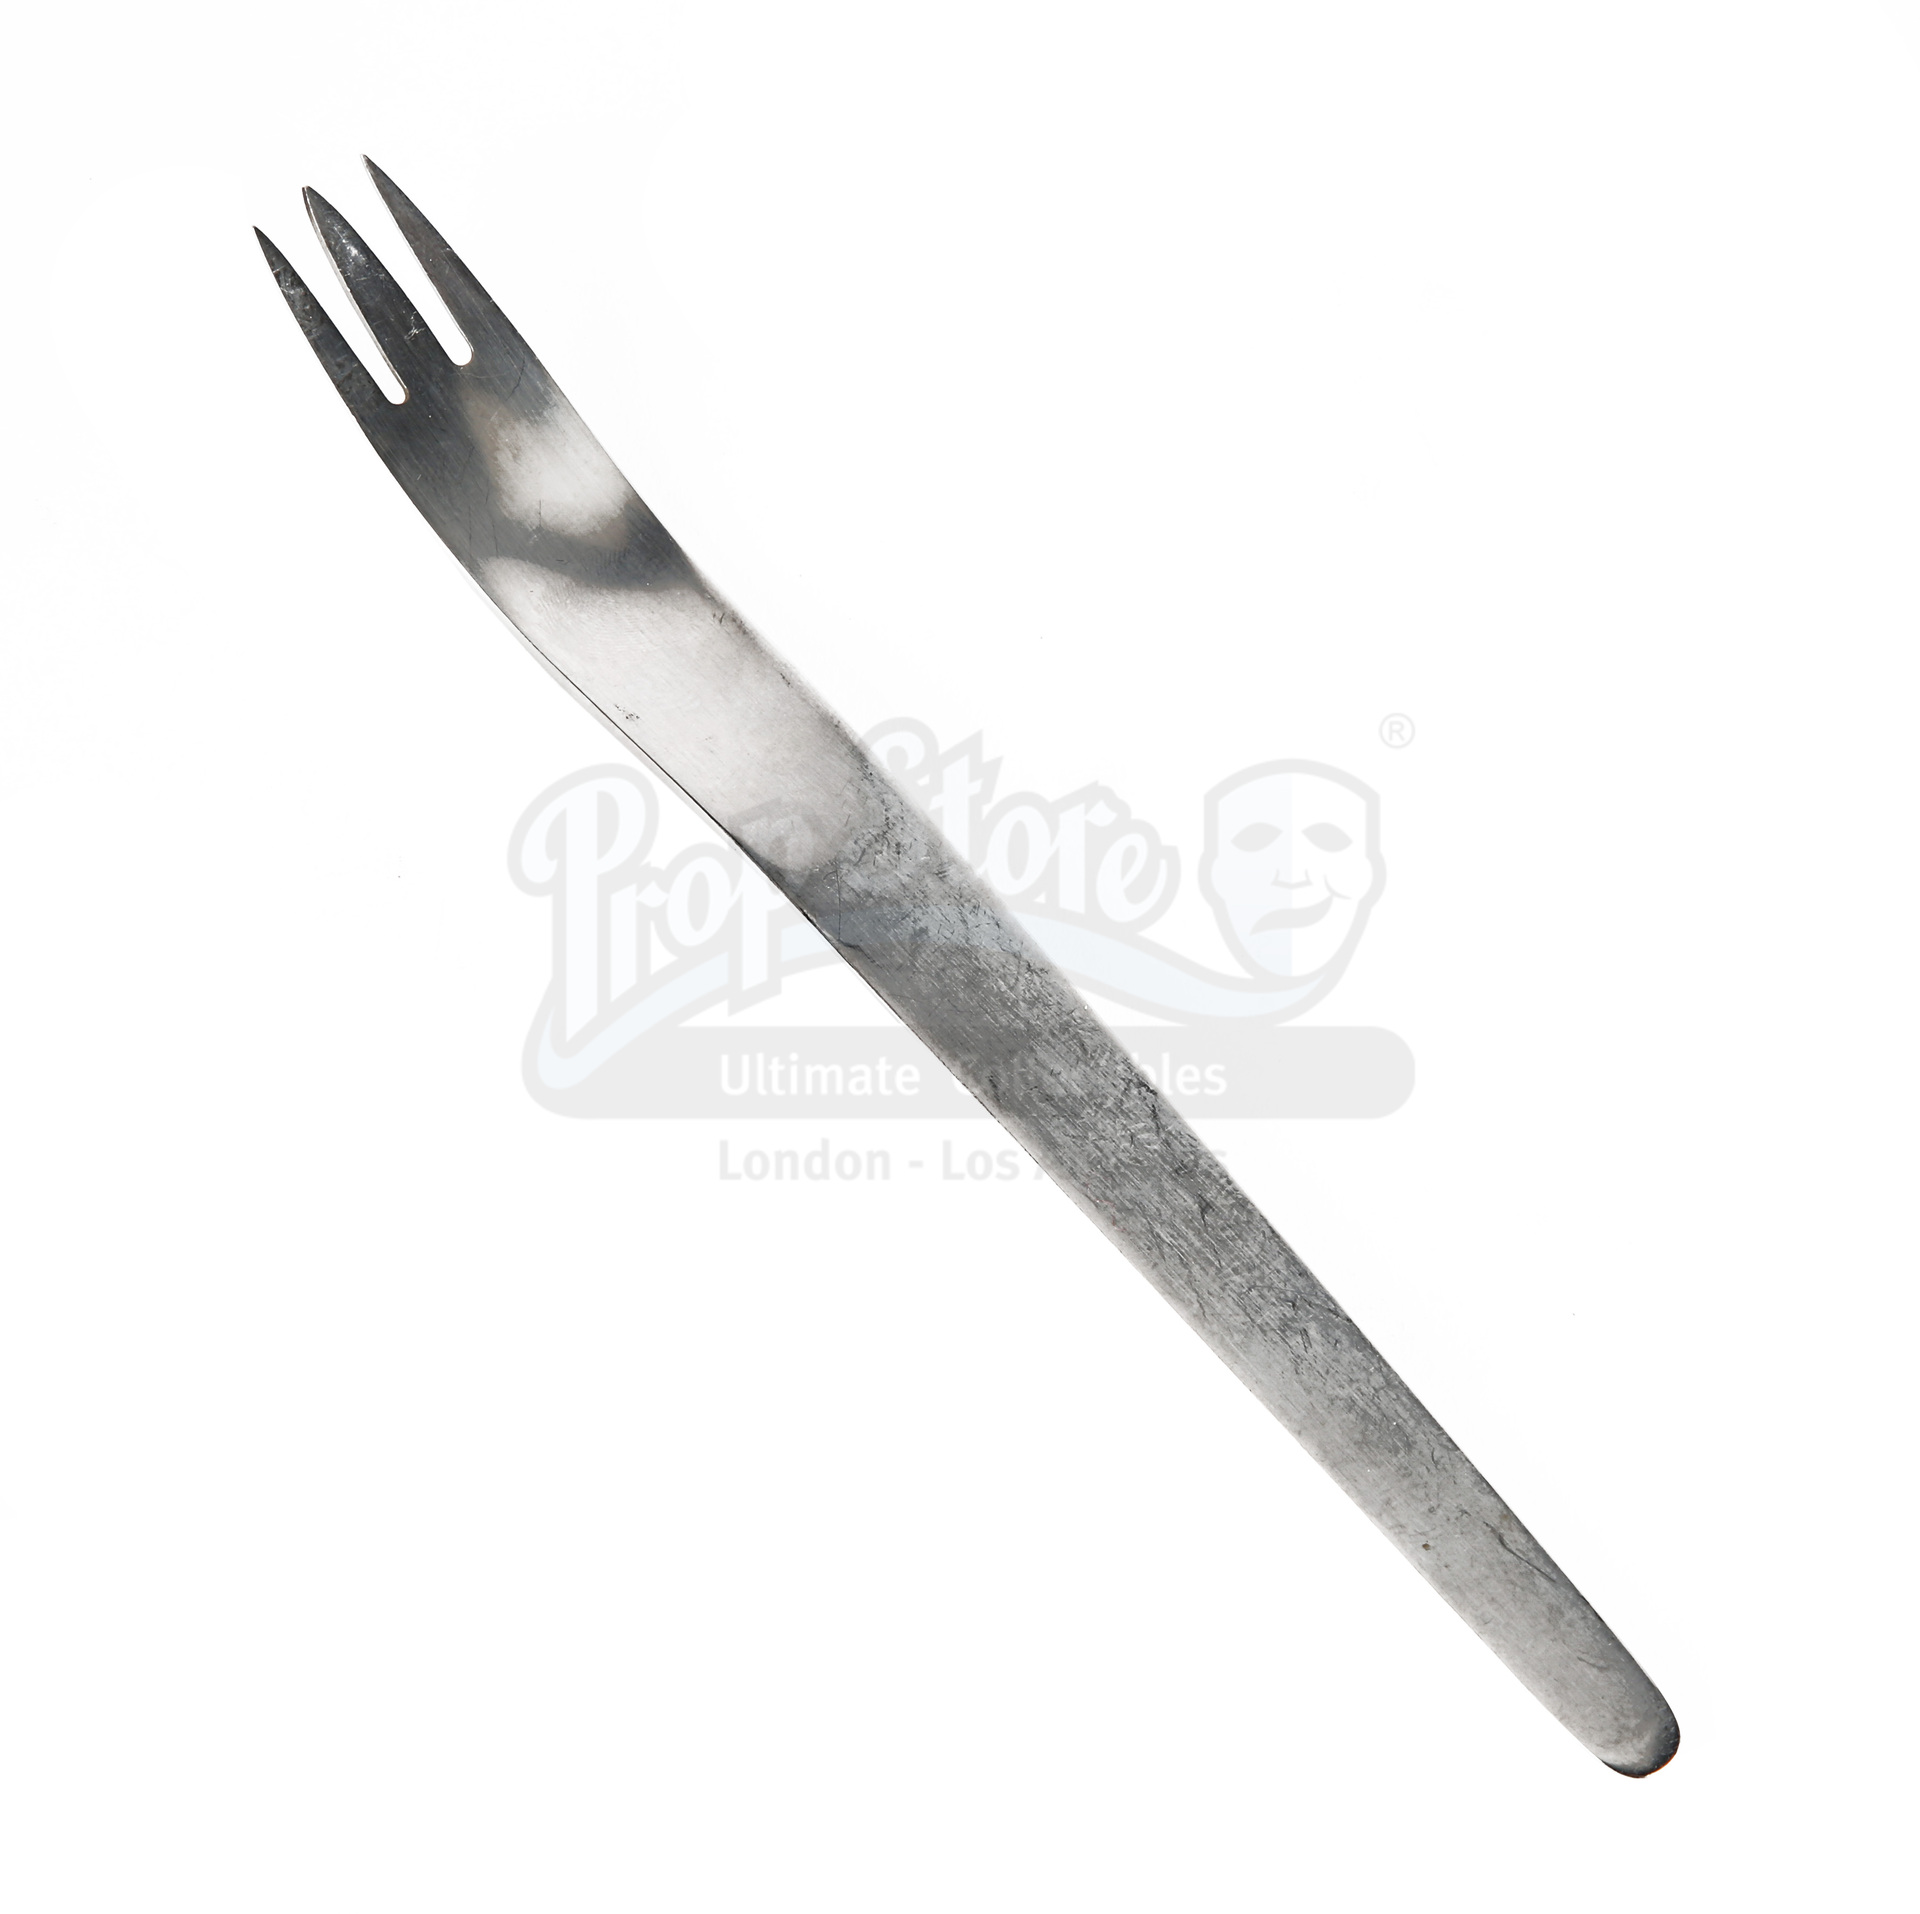 2001: A SPACE ODYSSEY (1968) - Discovery One Cutlery - Image 2 of 8